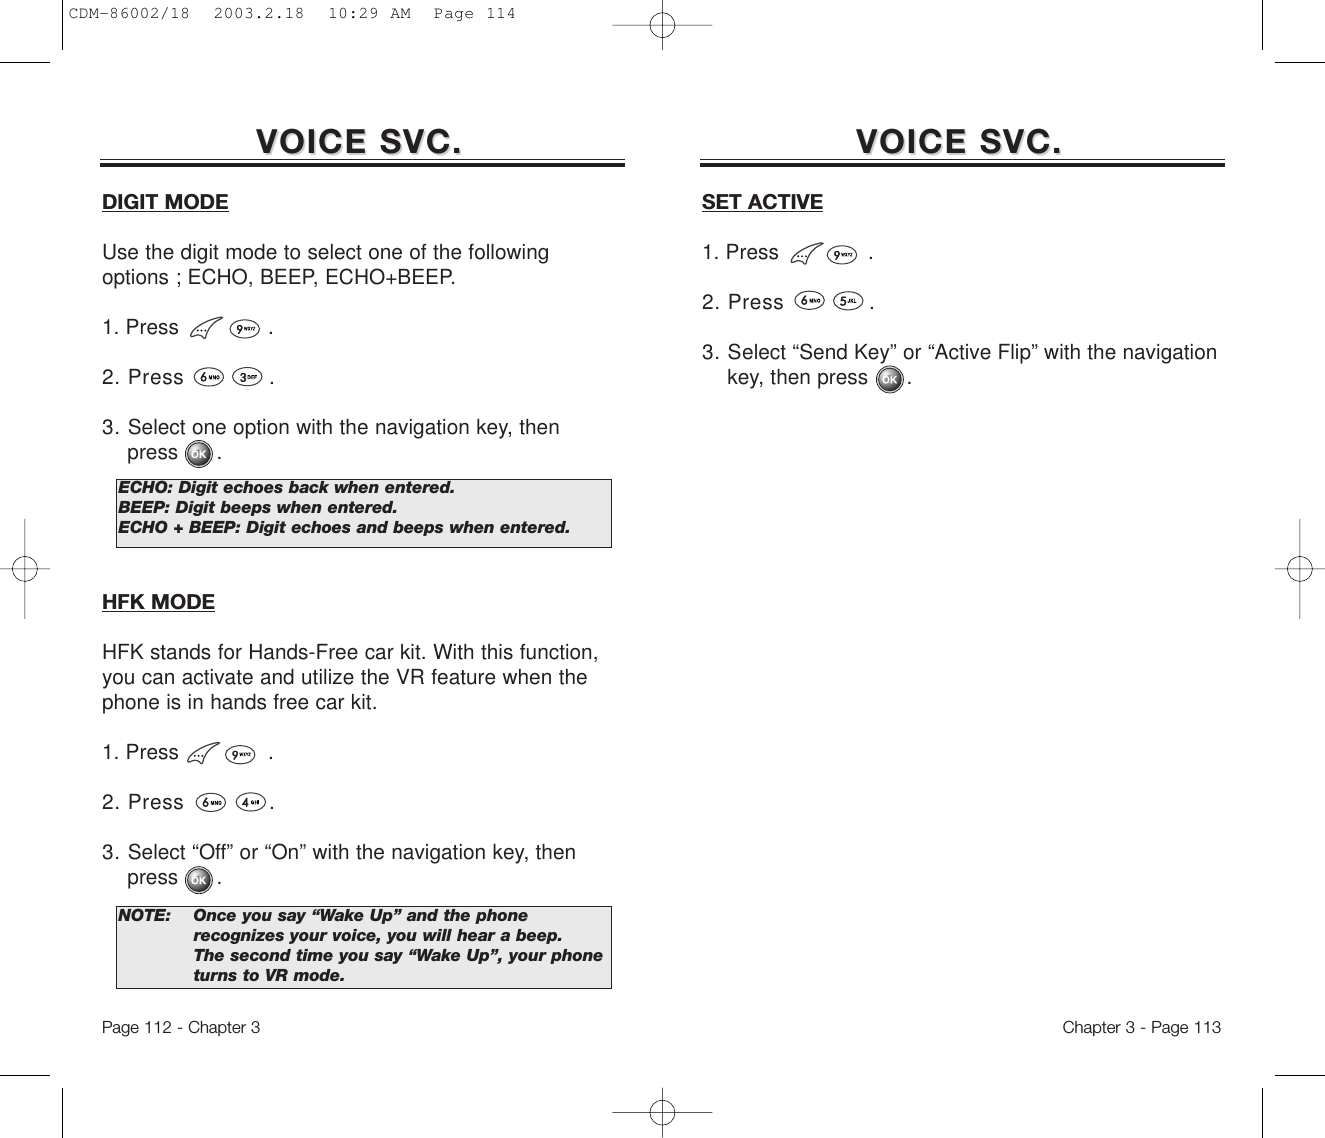 VOICE SVC.VOICE SVC.Chapter 3 - Page 113Page 112 - Chapter 3DIGIT MODEUse the digit mode to select one of the followingoptions ; ECHO, BEEP, ECHO+BEEP.1. Press              .2. Press            .3. Select one option with the navigation key, then press      .HFK MODEHFK stands for Hands-Free car kit. With this function,you can activate and utilize the VR feature when thephone is in hands free car kit.1. Press              .2. Press            .3. Select “Off” or “On” with the navigation key, then press      .ECHO: Digit echoes back when entered.BEEP: Digit beeps when entered.ECHO + BEEP: Digit echoes and beeps when entered.NOTE: Once you say “Wake Up” and the phone recognizes your voice, you will hear a beep.The second time you say “Wake Up”, your phone turns to VR mode.VOICE SVC.VOICE SVC.SET ACTIVE1. Press              .2. Press            .3. Select “Send Key” or “Active Flip” with the navigation key, then press      .CDM-86002/18  2003.2.18  10:29 AM  Page 114